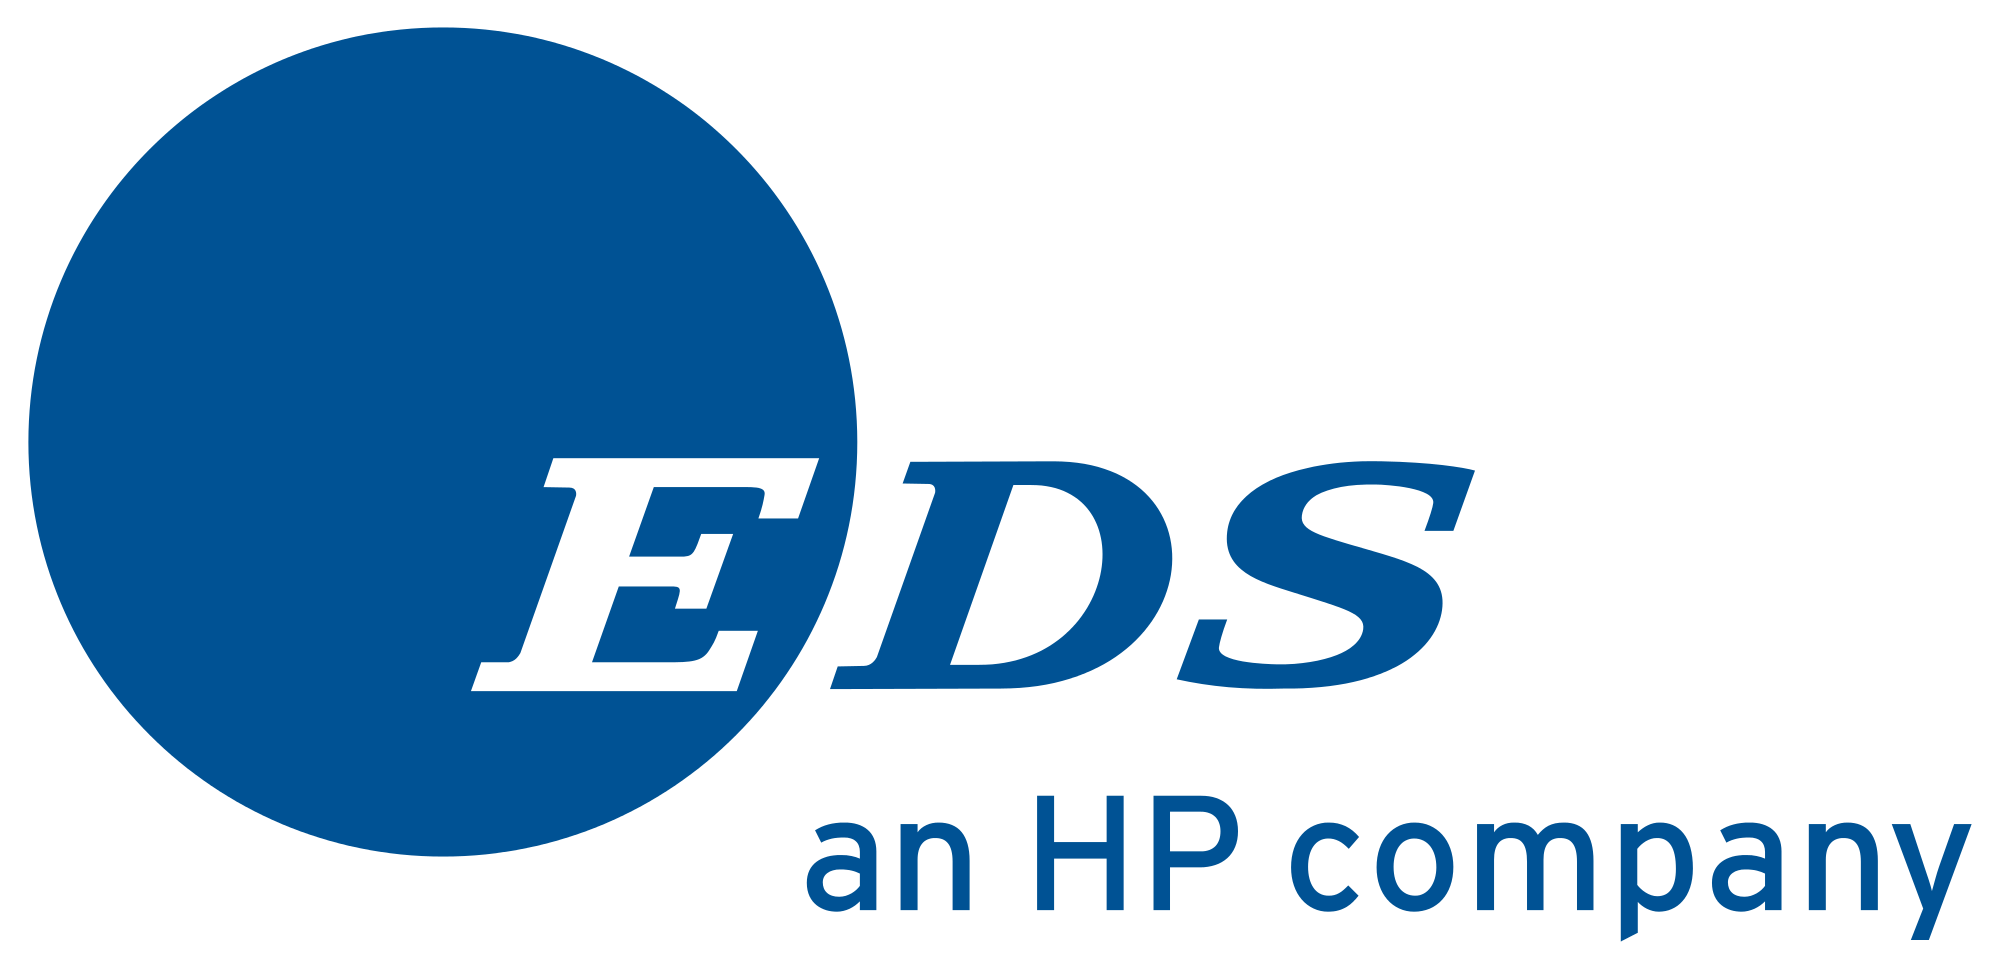 Electronic_Data_Systems_logo.svg EDS